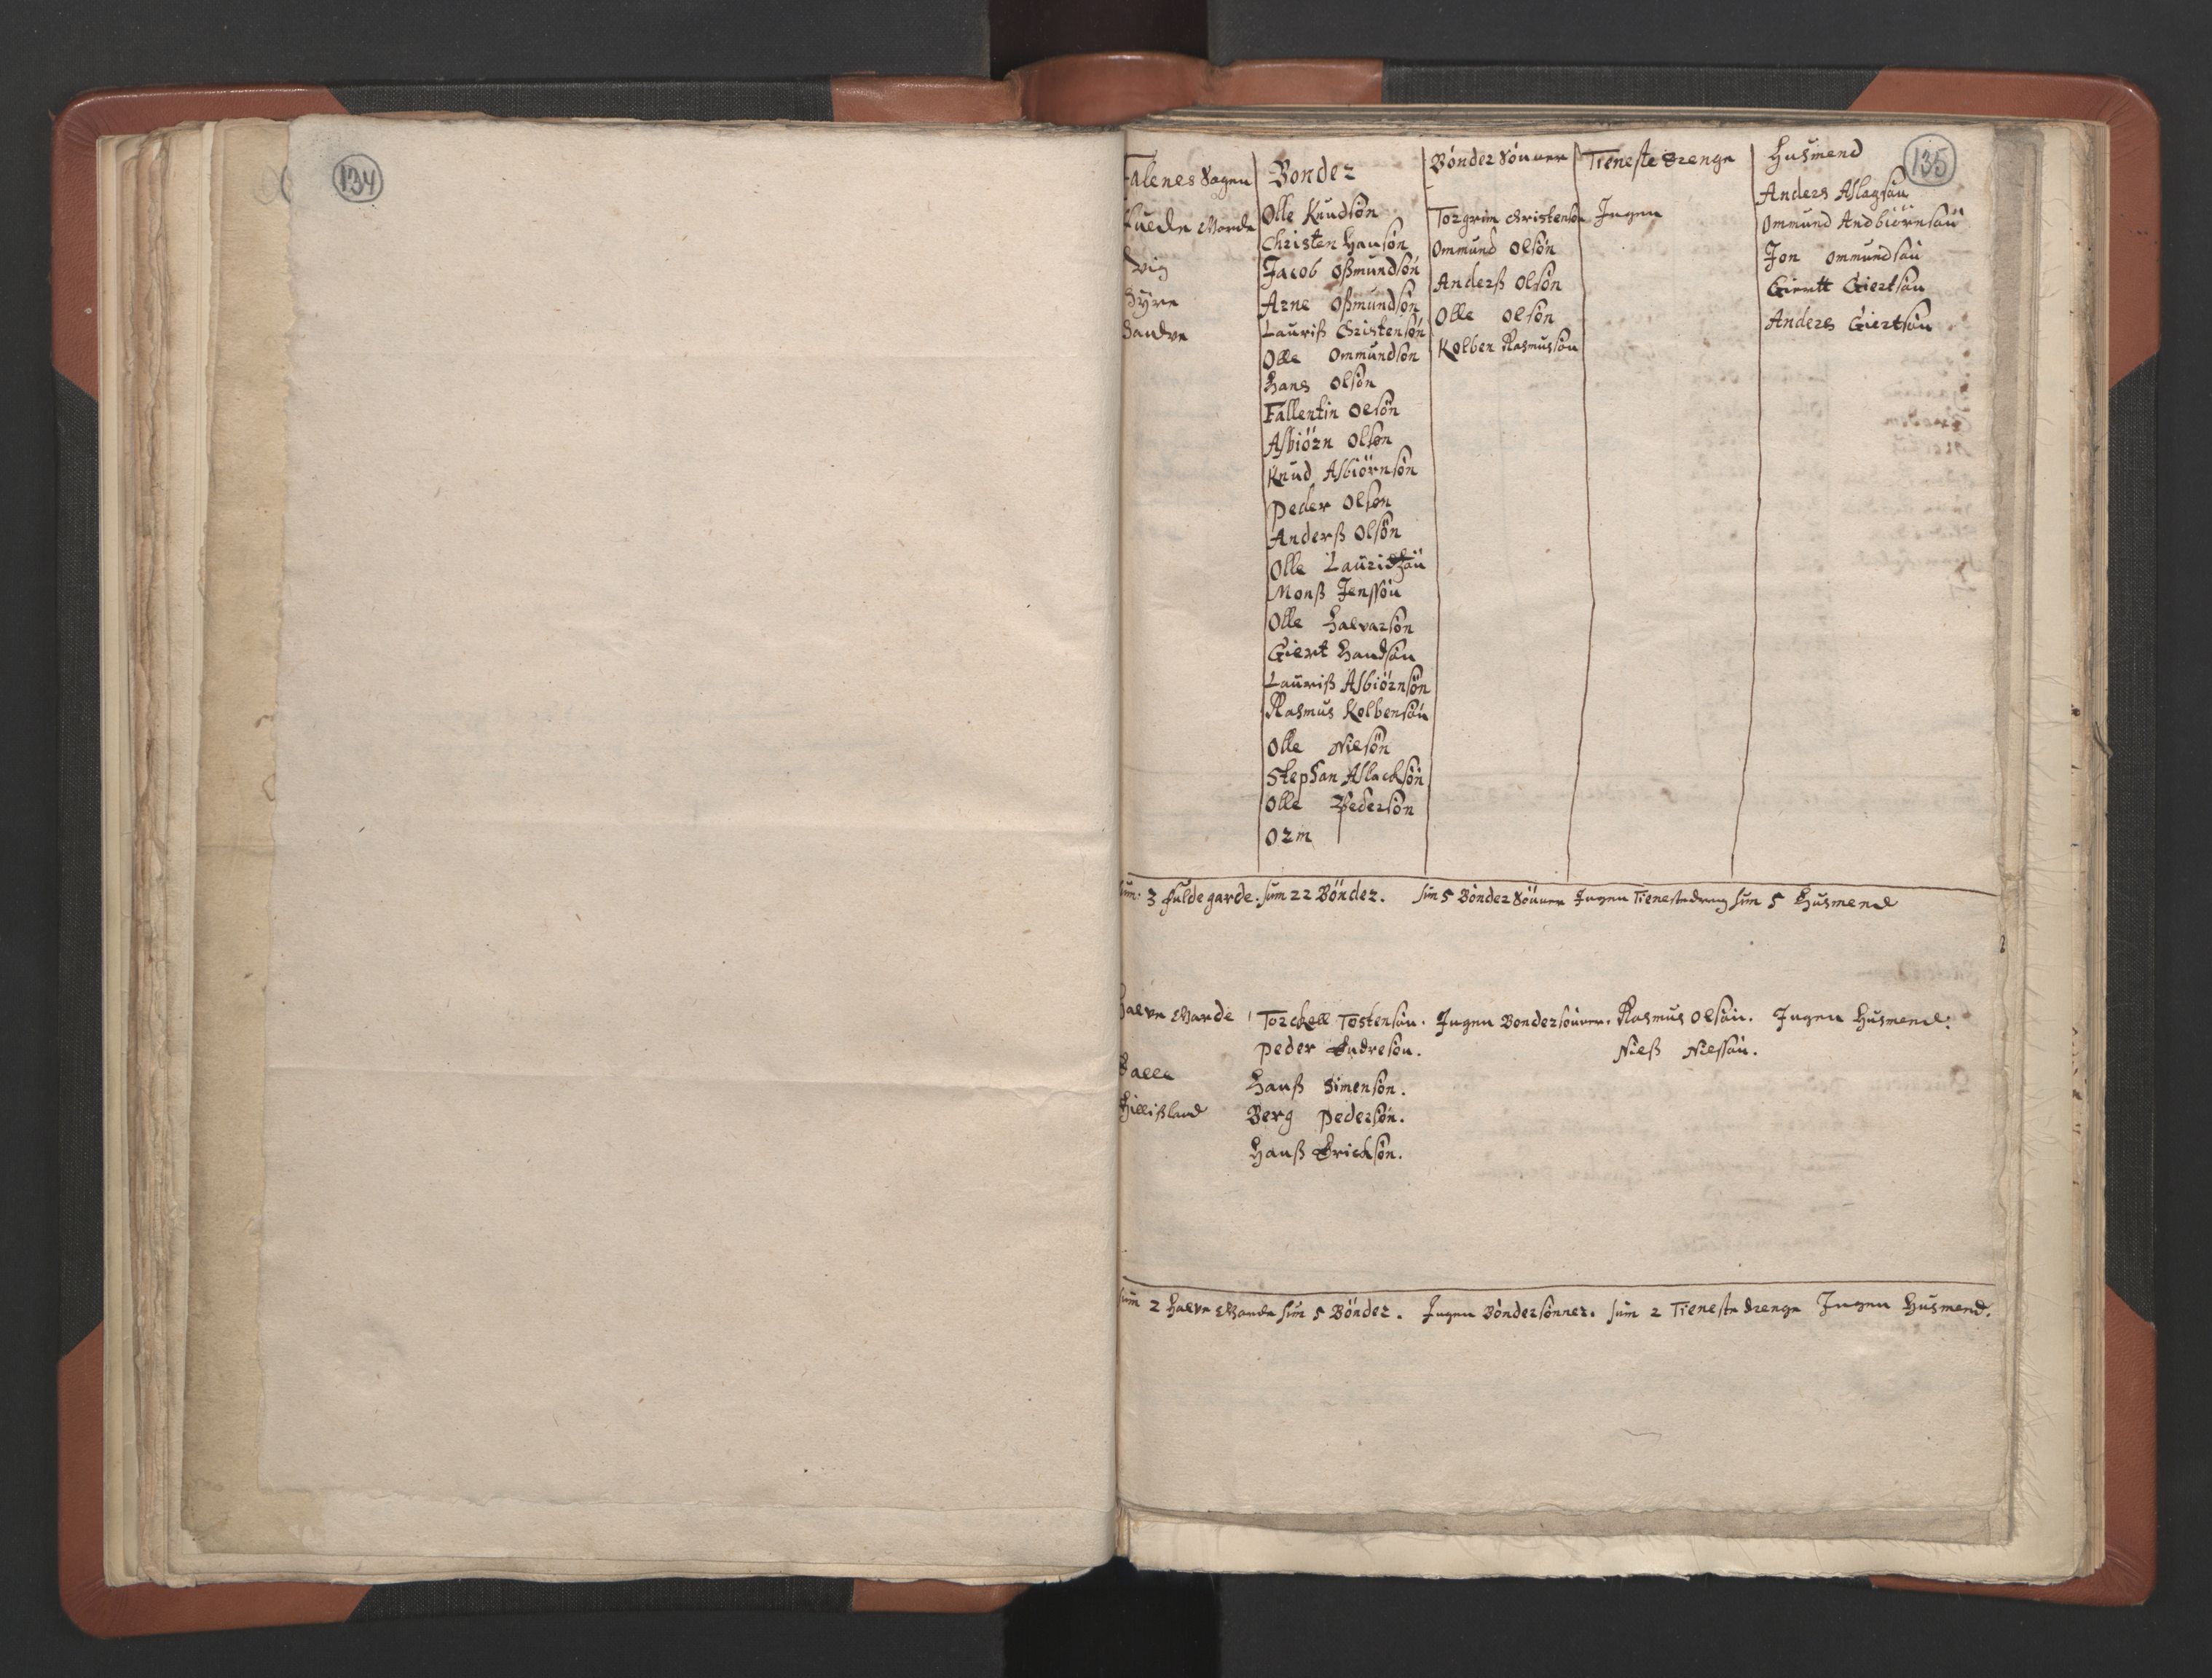 RA, Vicar's Census 1664-1666, no. 18: Stavanger deanery and Karmsund deanery, 1664-1666, p. 134-135